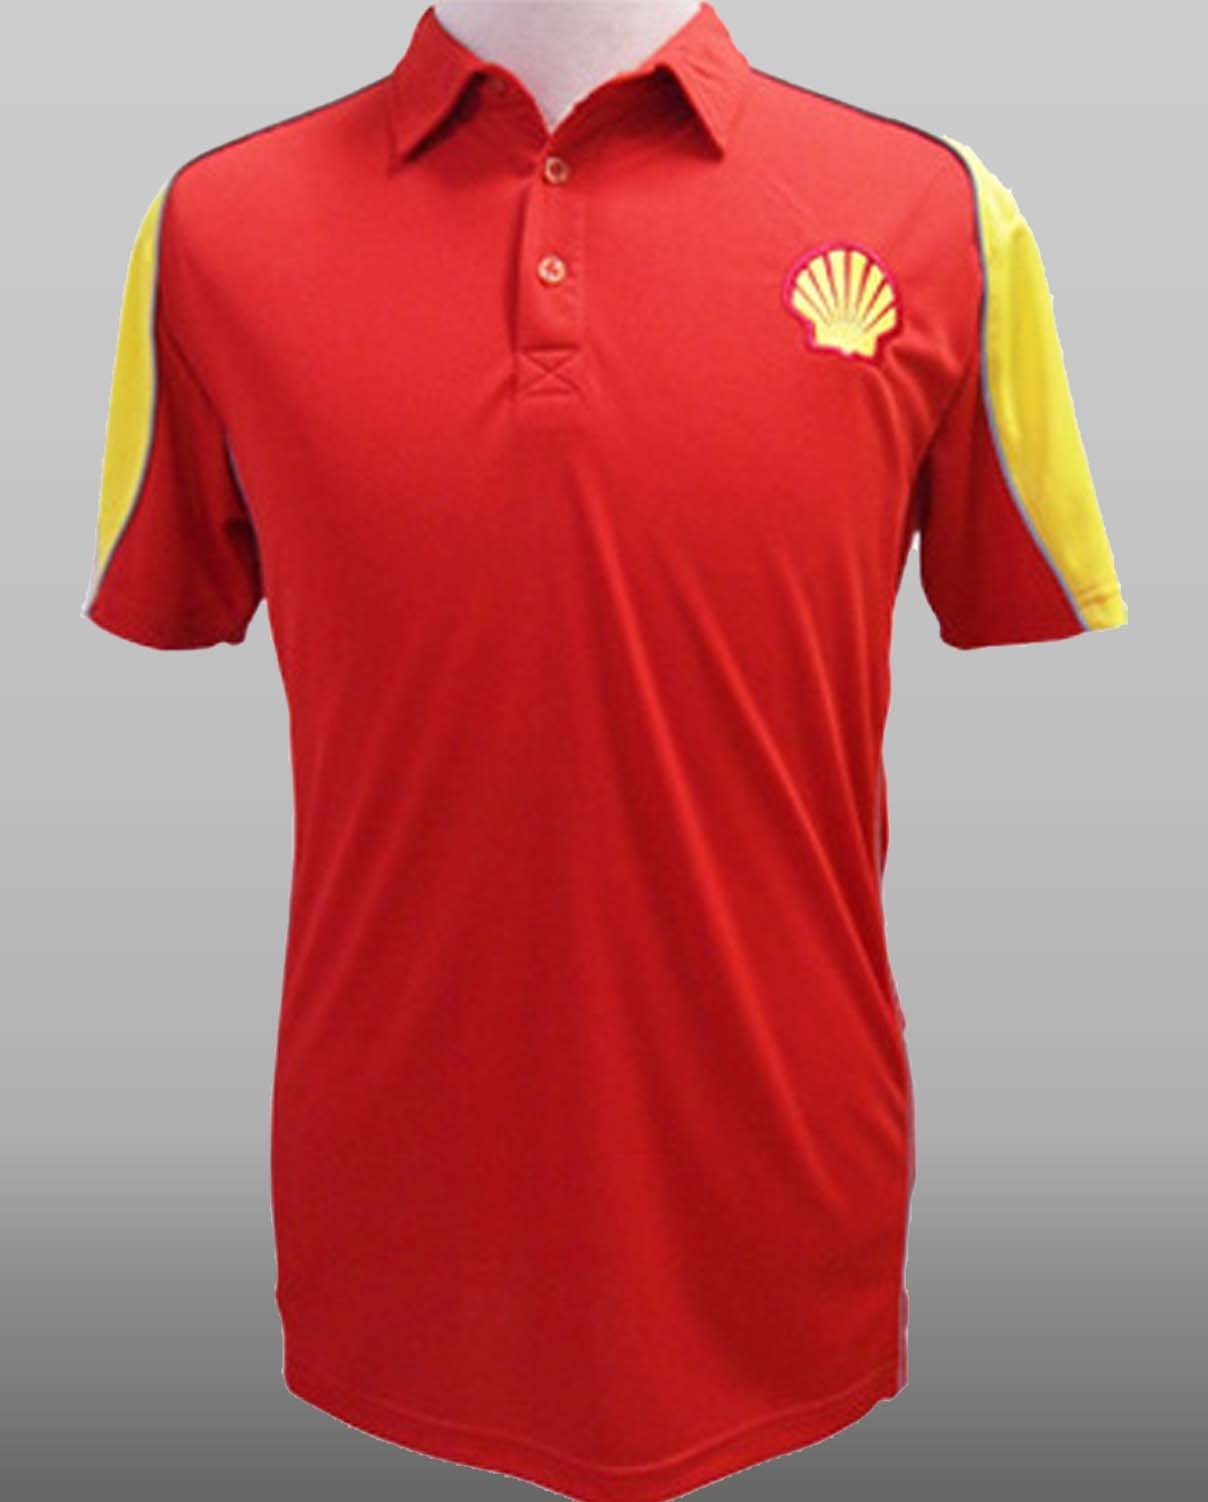 Corporate Polo | peacecommission.kdsg.gov.ng